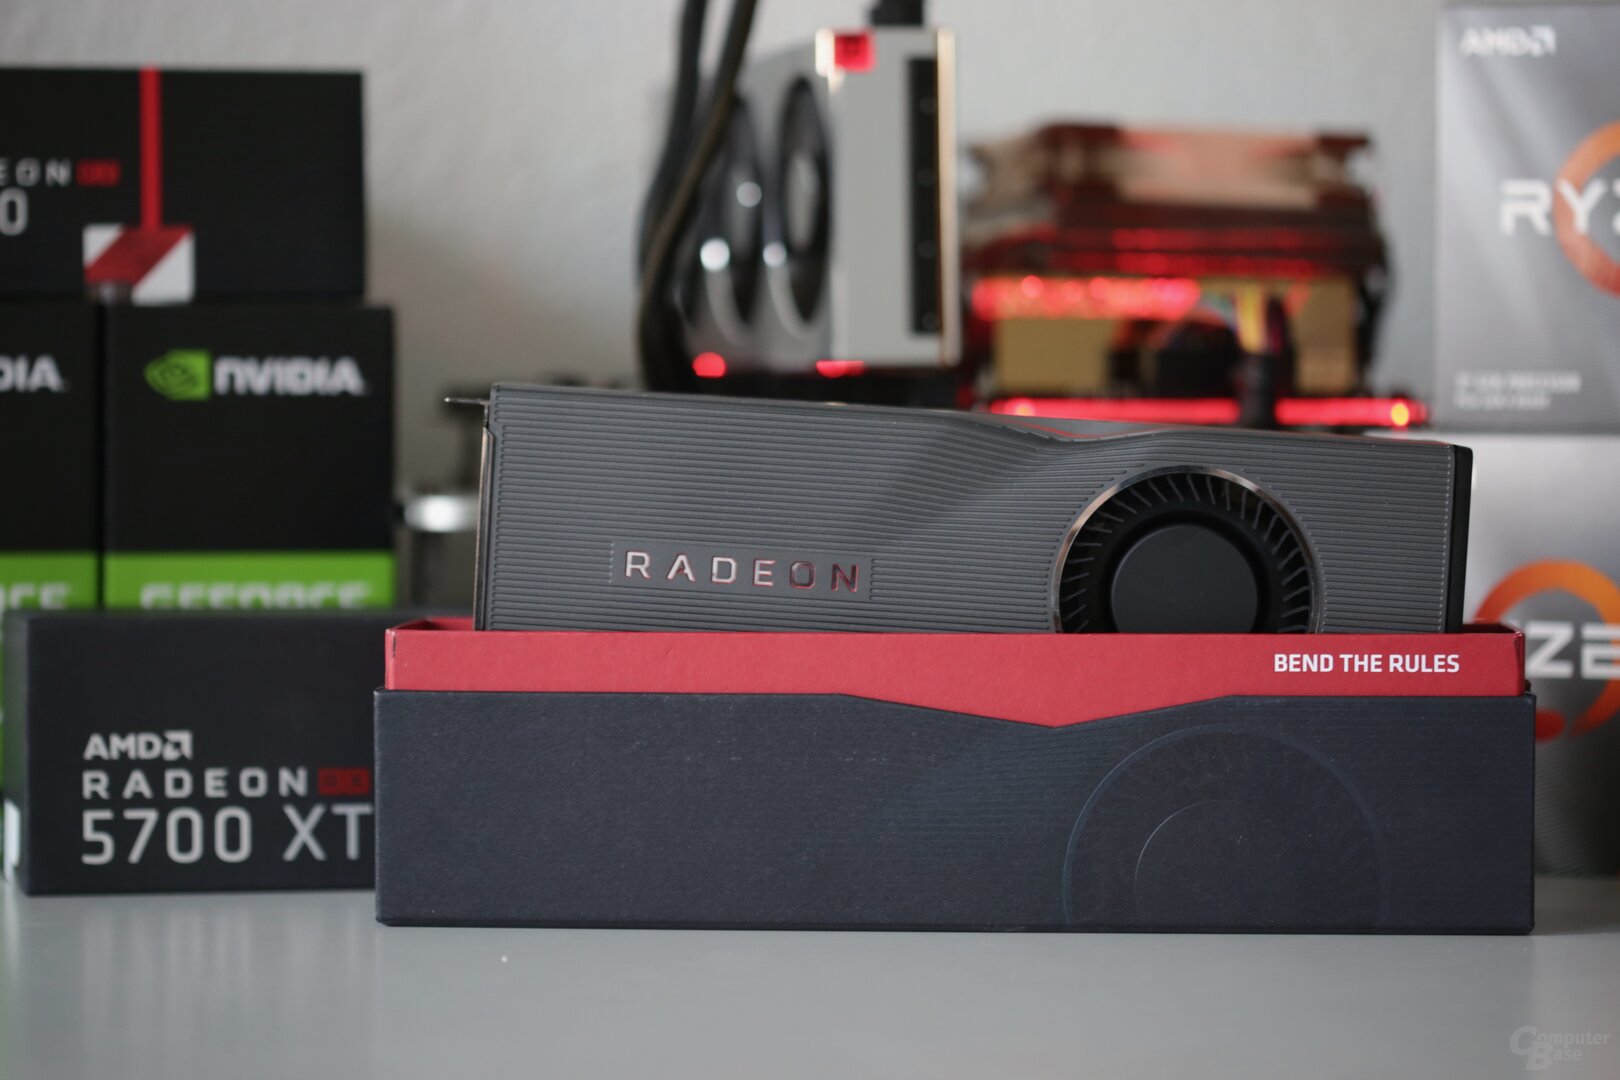 The Radeon RX 5700 XT with the dent in the reference cooling system